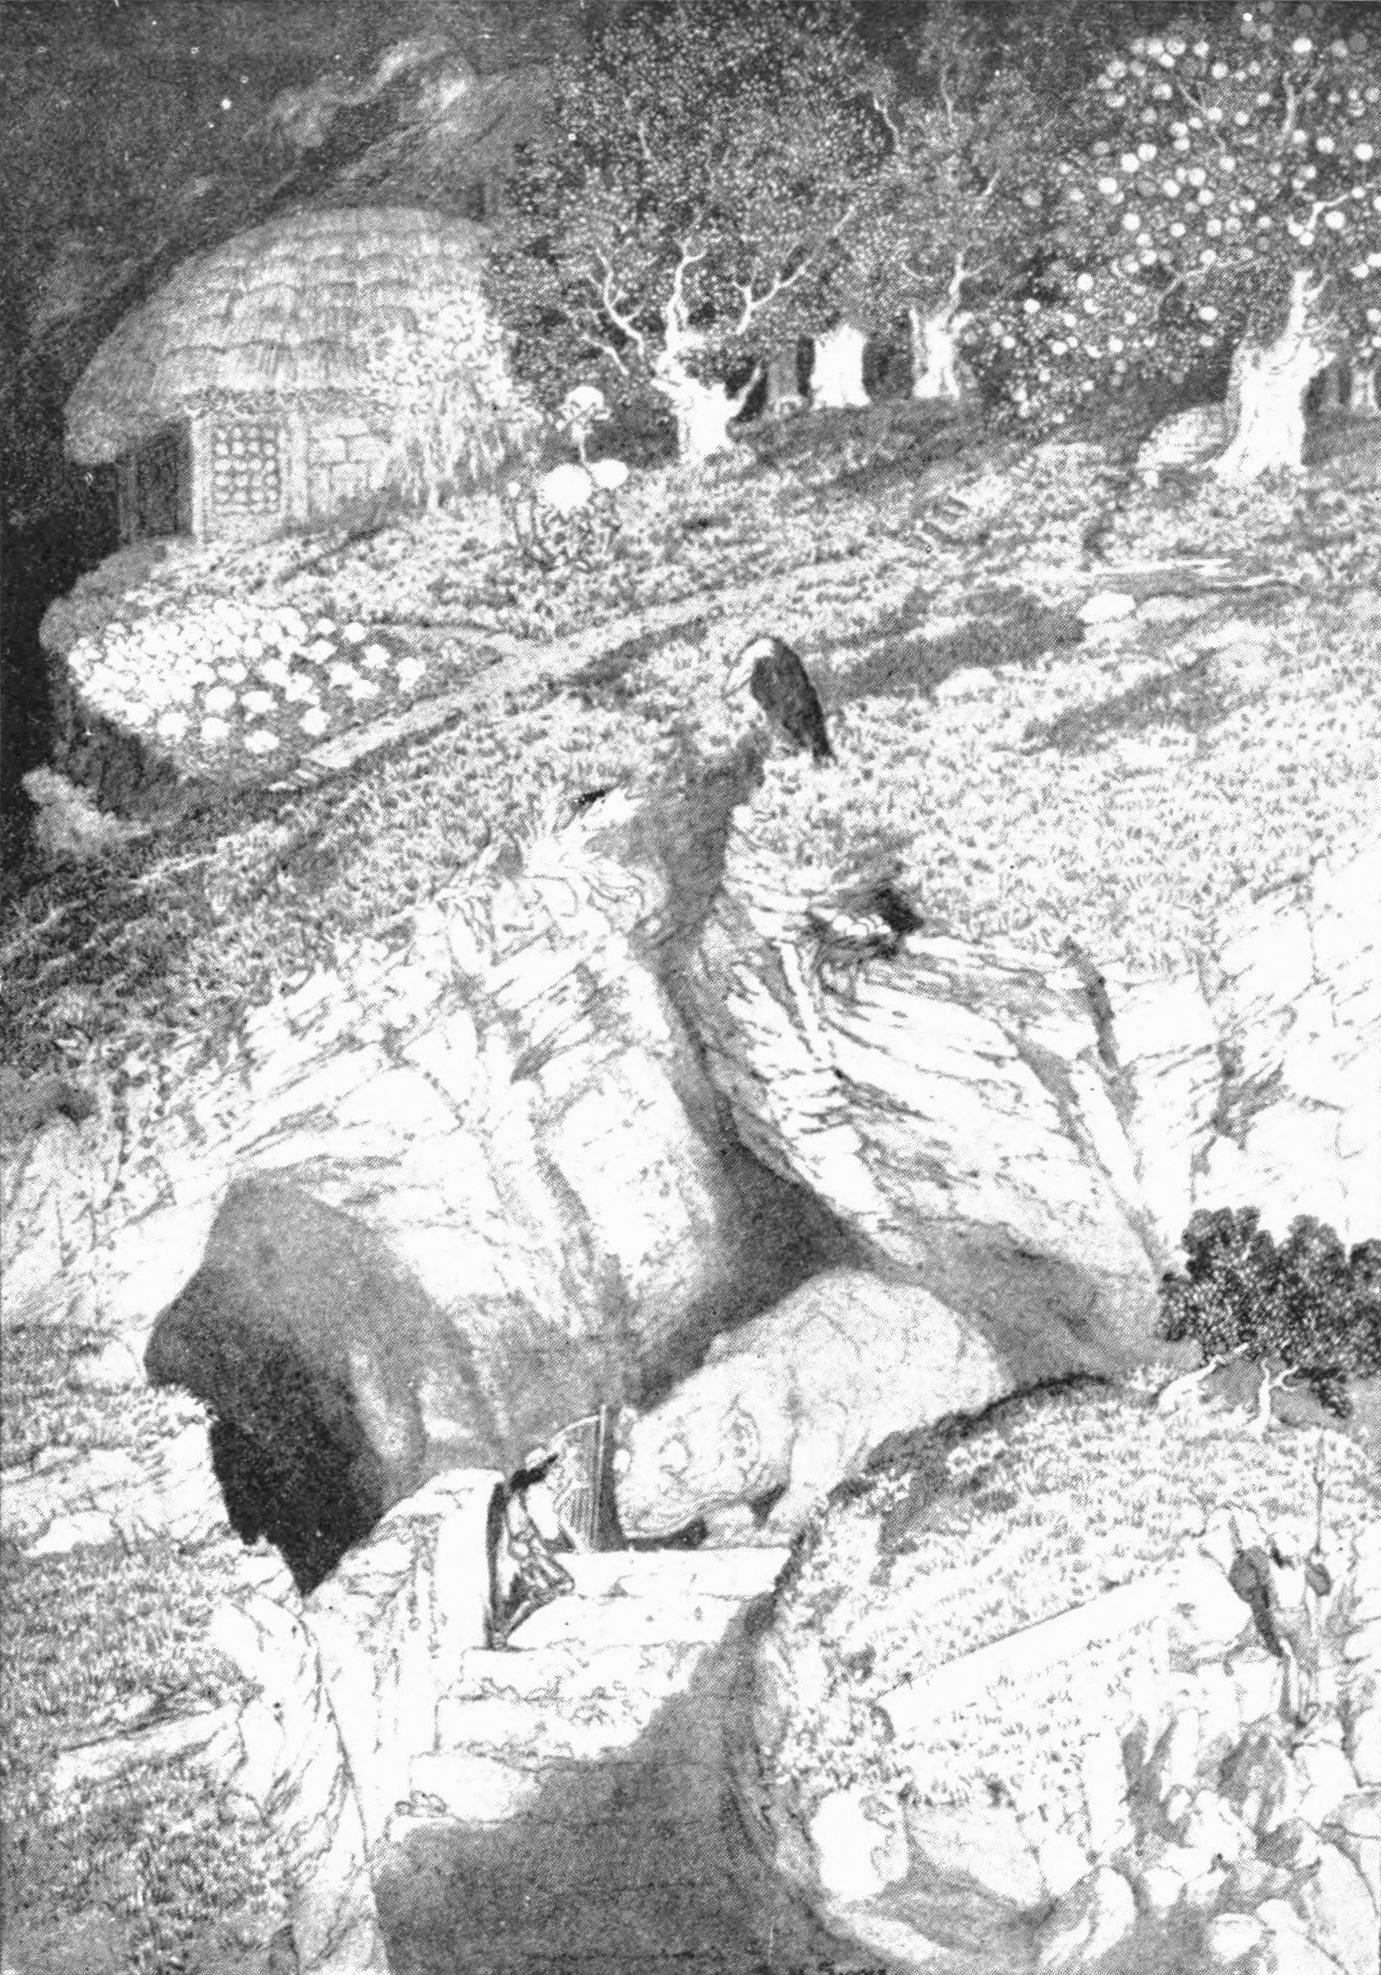 A man stands at the bottom of a mountain at a gate carved into the rock, where a monster is looking out at him. On top of the mountain is a grassy field with a house and trees.